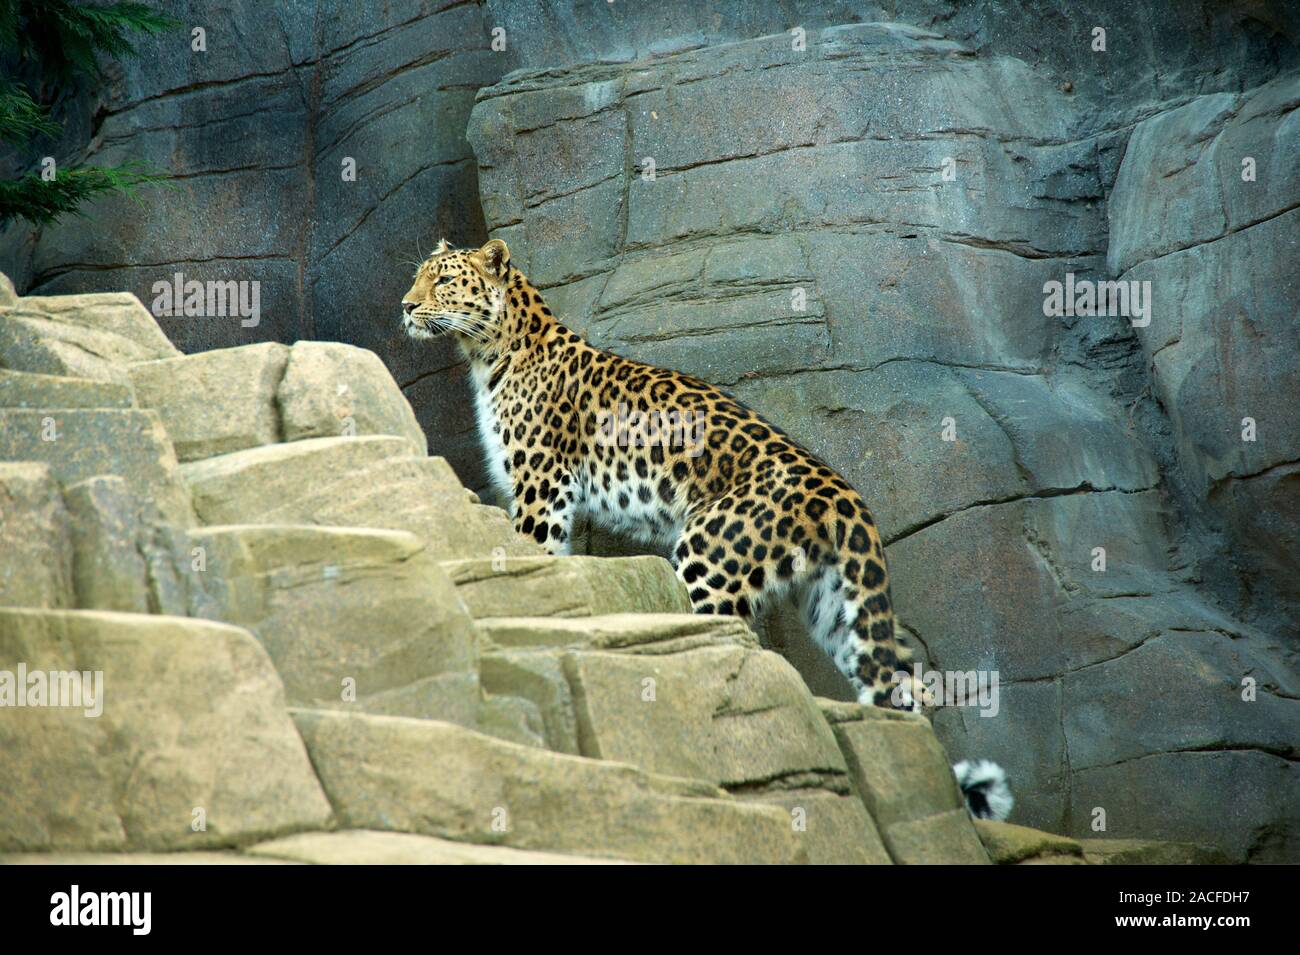 The Leopard - an endangered African species. Stock Photo